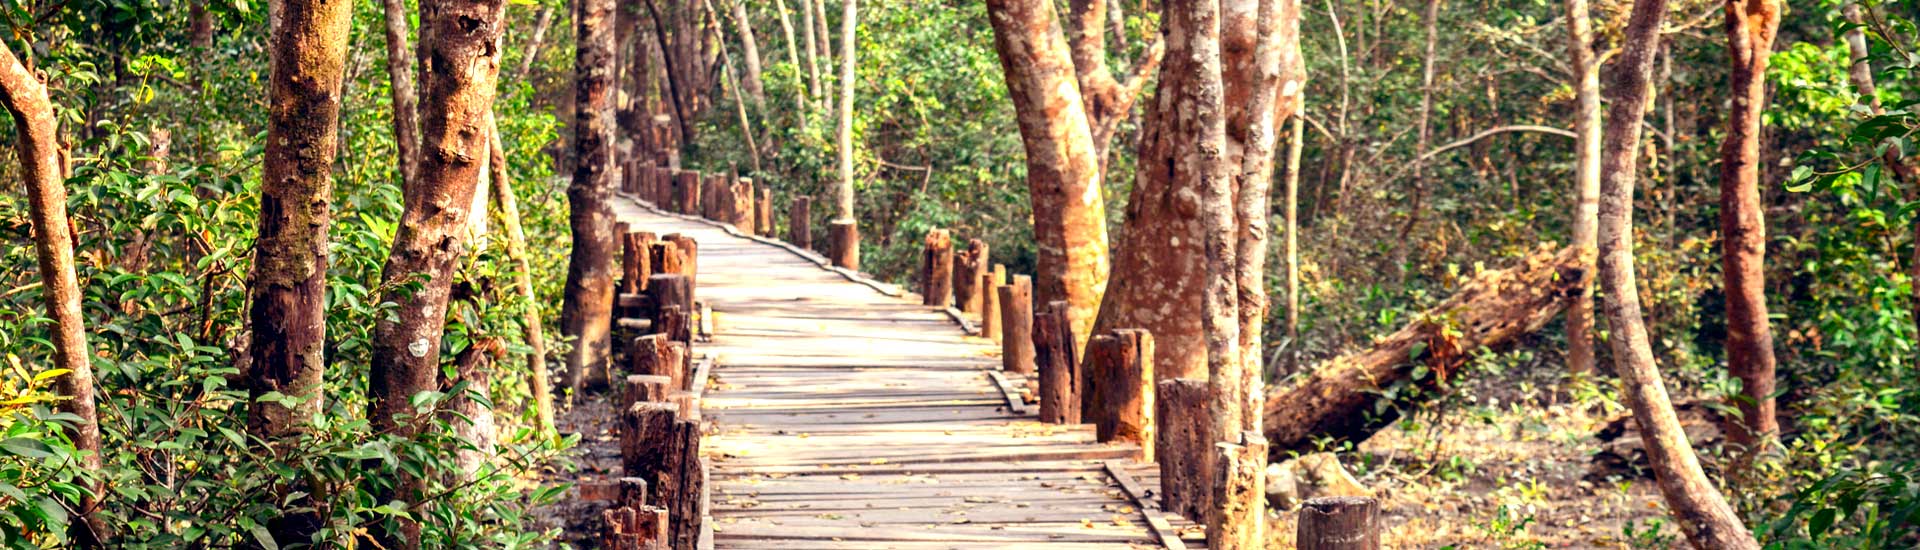 Exclusive forest tour in Sundarban- What to expect?